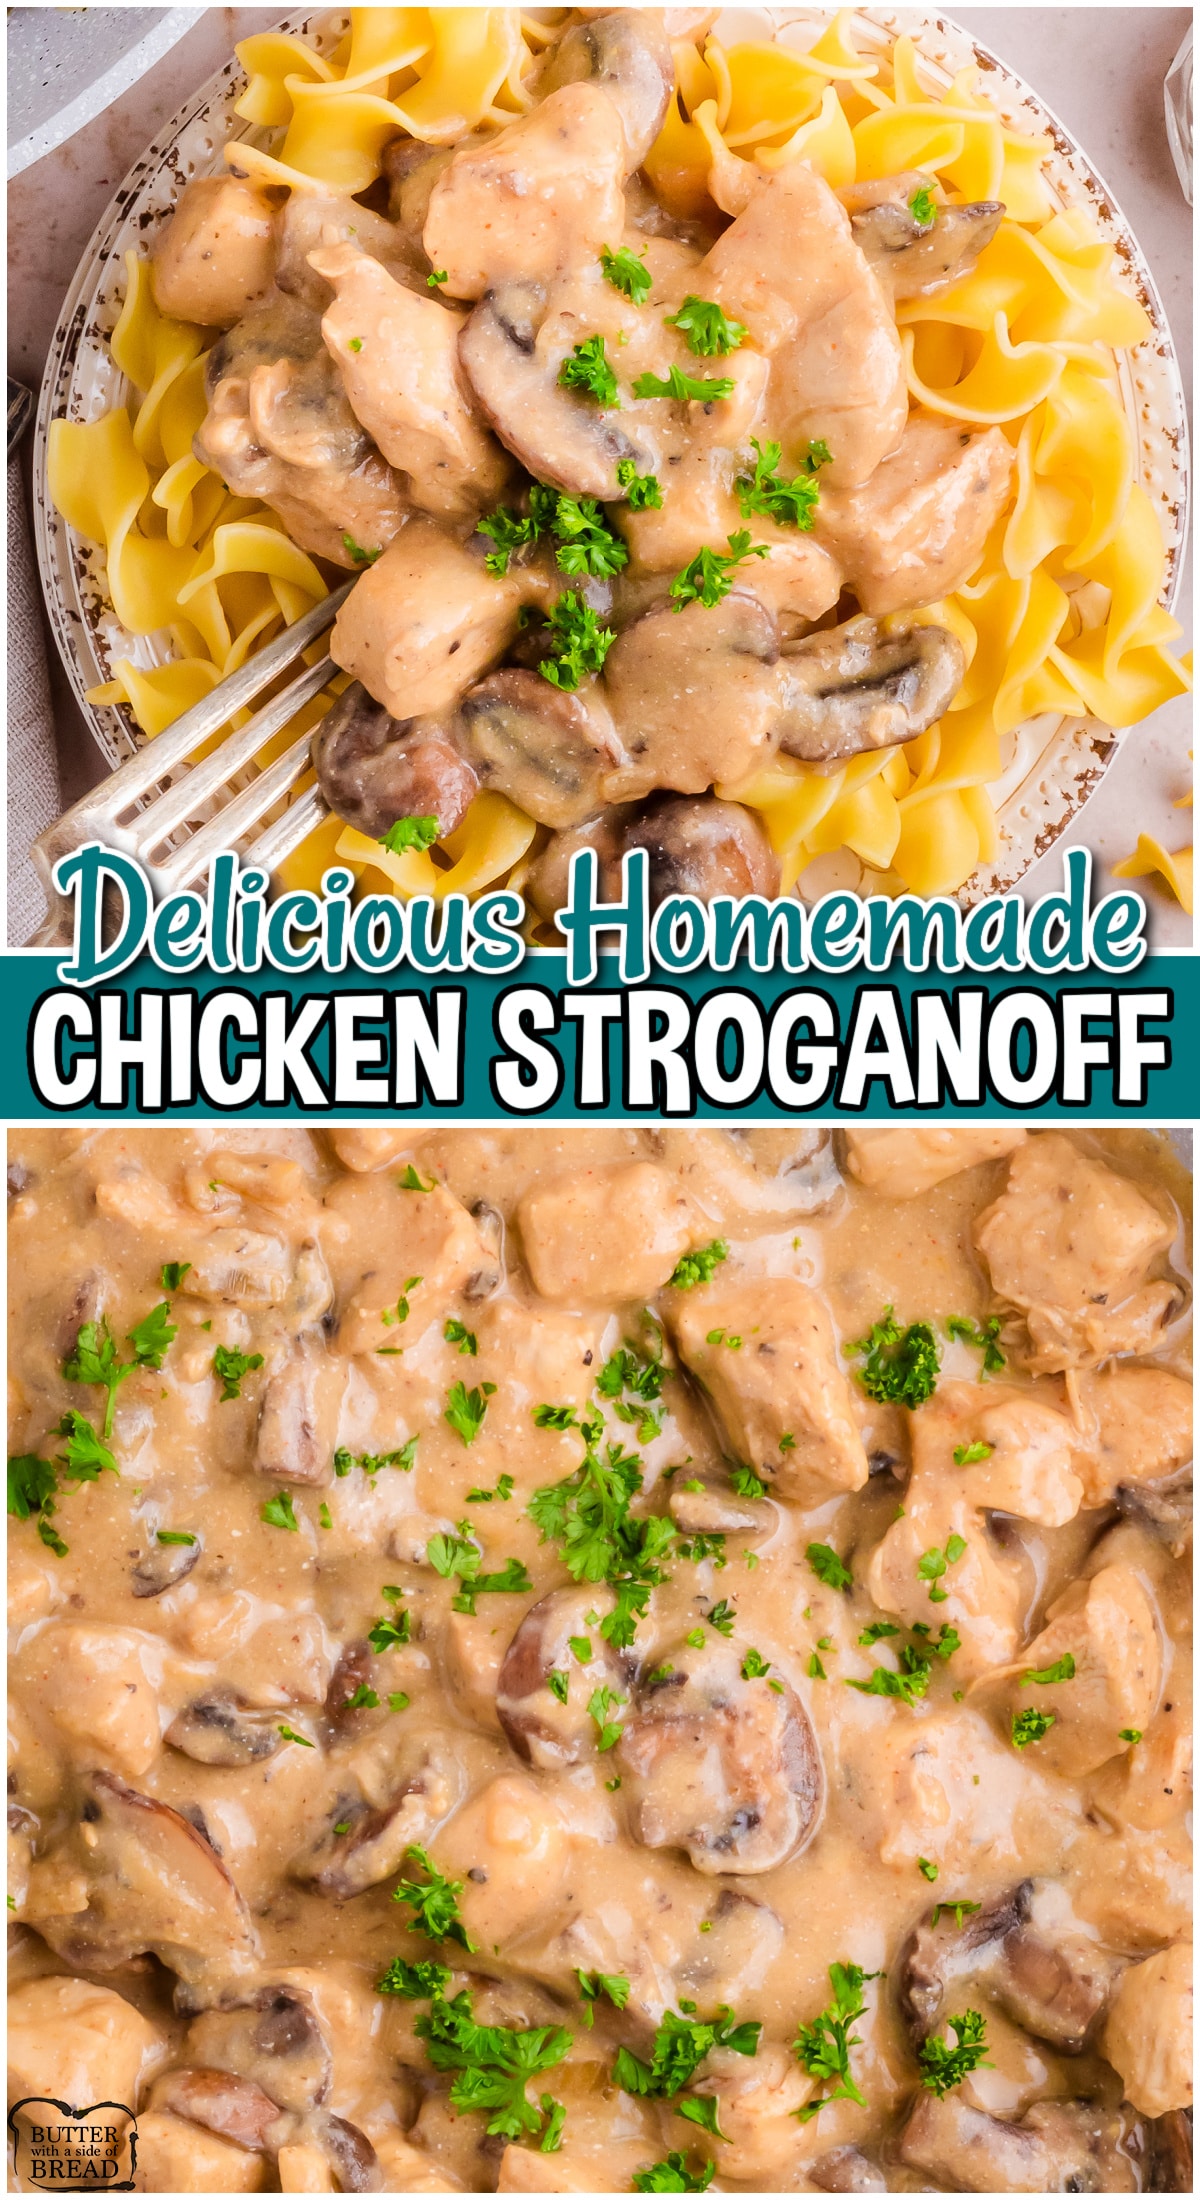 Chicken Stroganoff is a comforting dinner that's easy to make & full of flavor! This from scratch stroganoff recipe consists of sauteed chicken in a creamy mushroom sauce is ready in about 30 minutes!